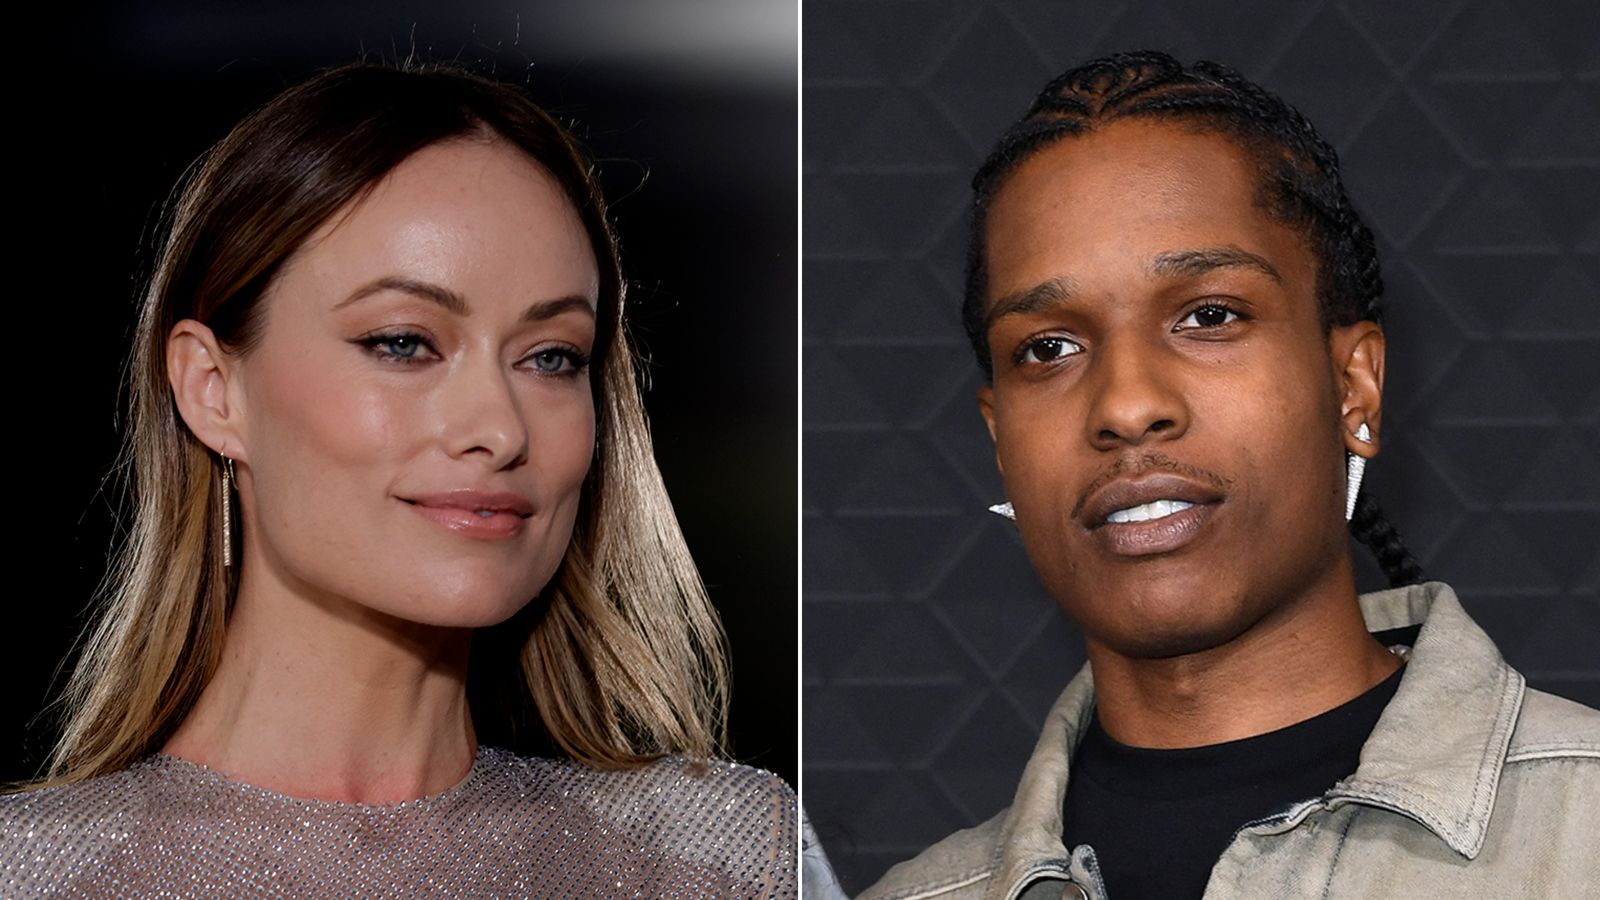 Olivia Wilde called A$AP Rocky 'hot' and got roasted for it